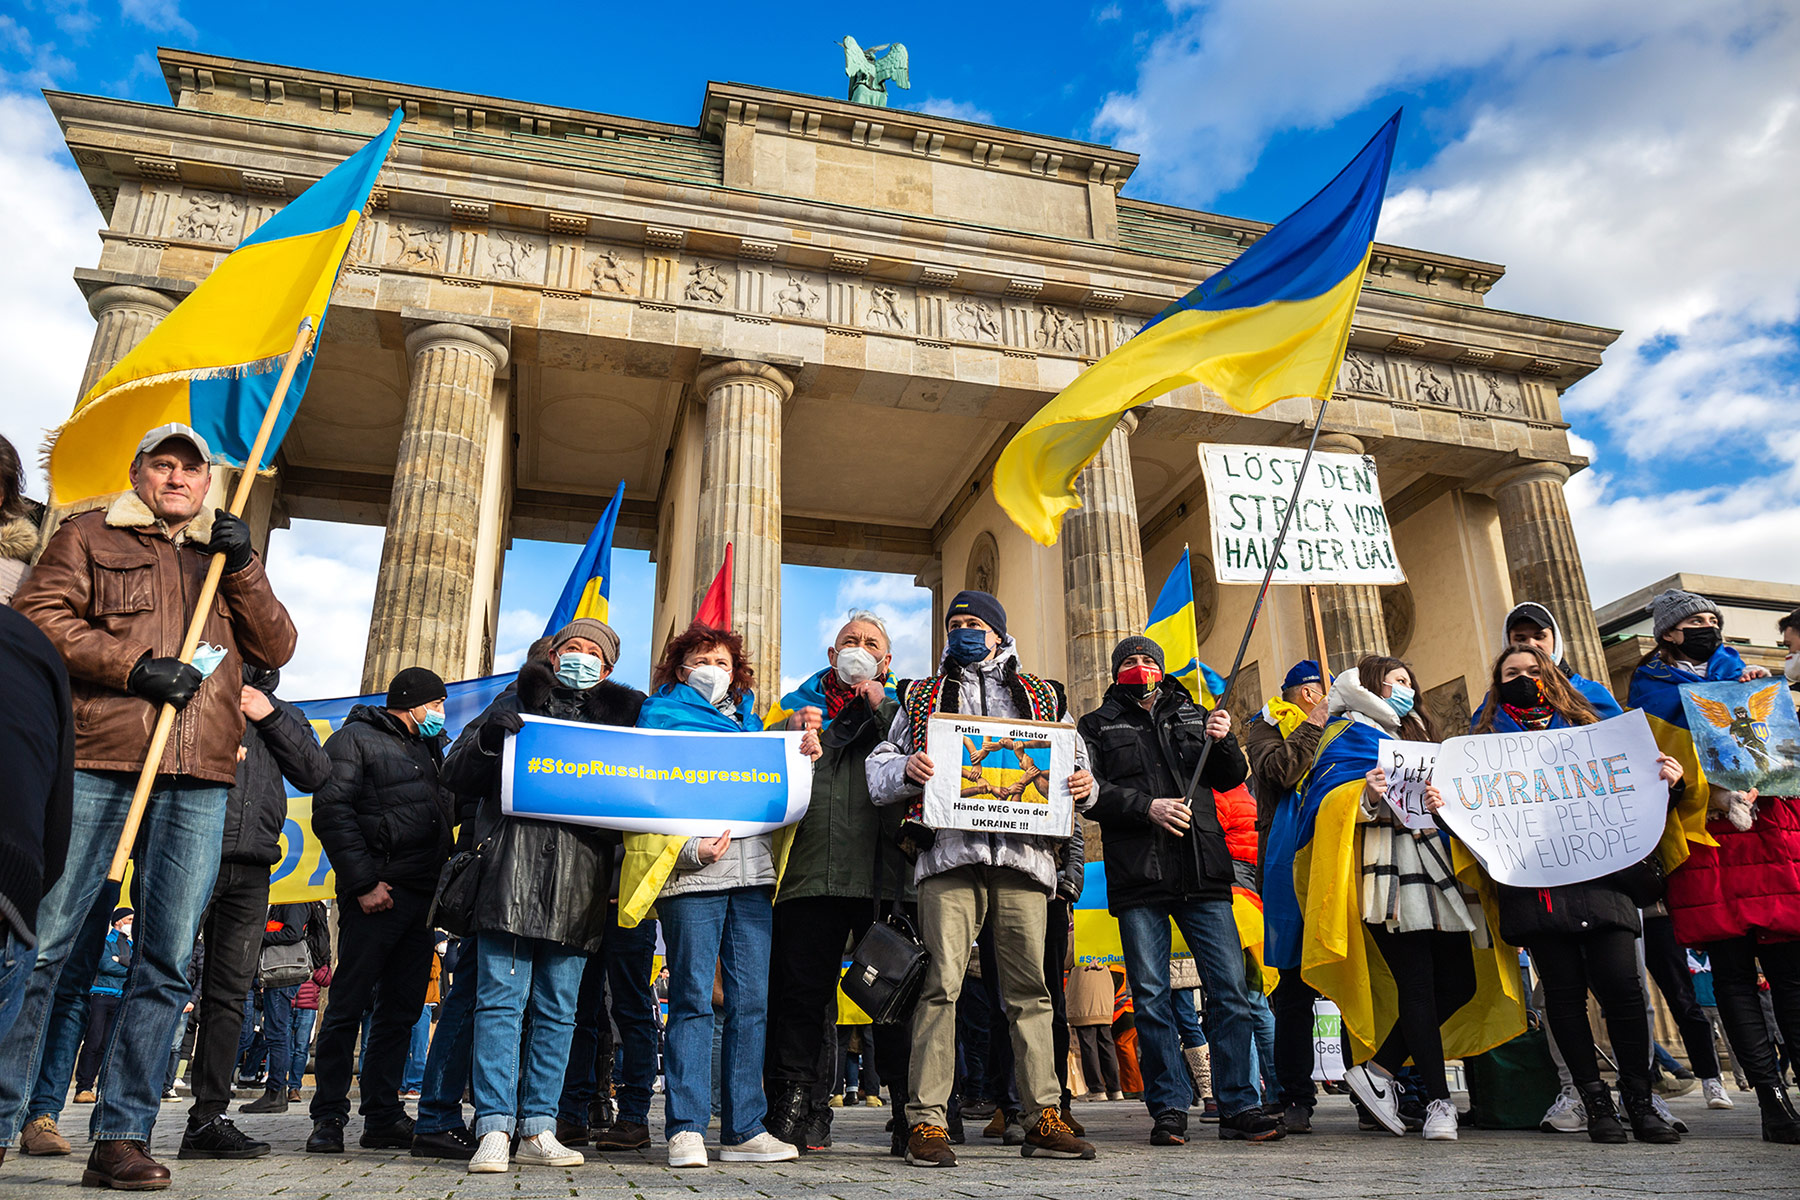 Germany Draws Conclusions From Russia's Invasion of Ukraine